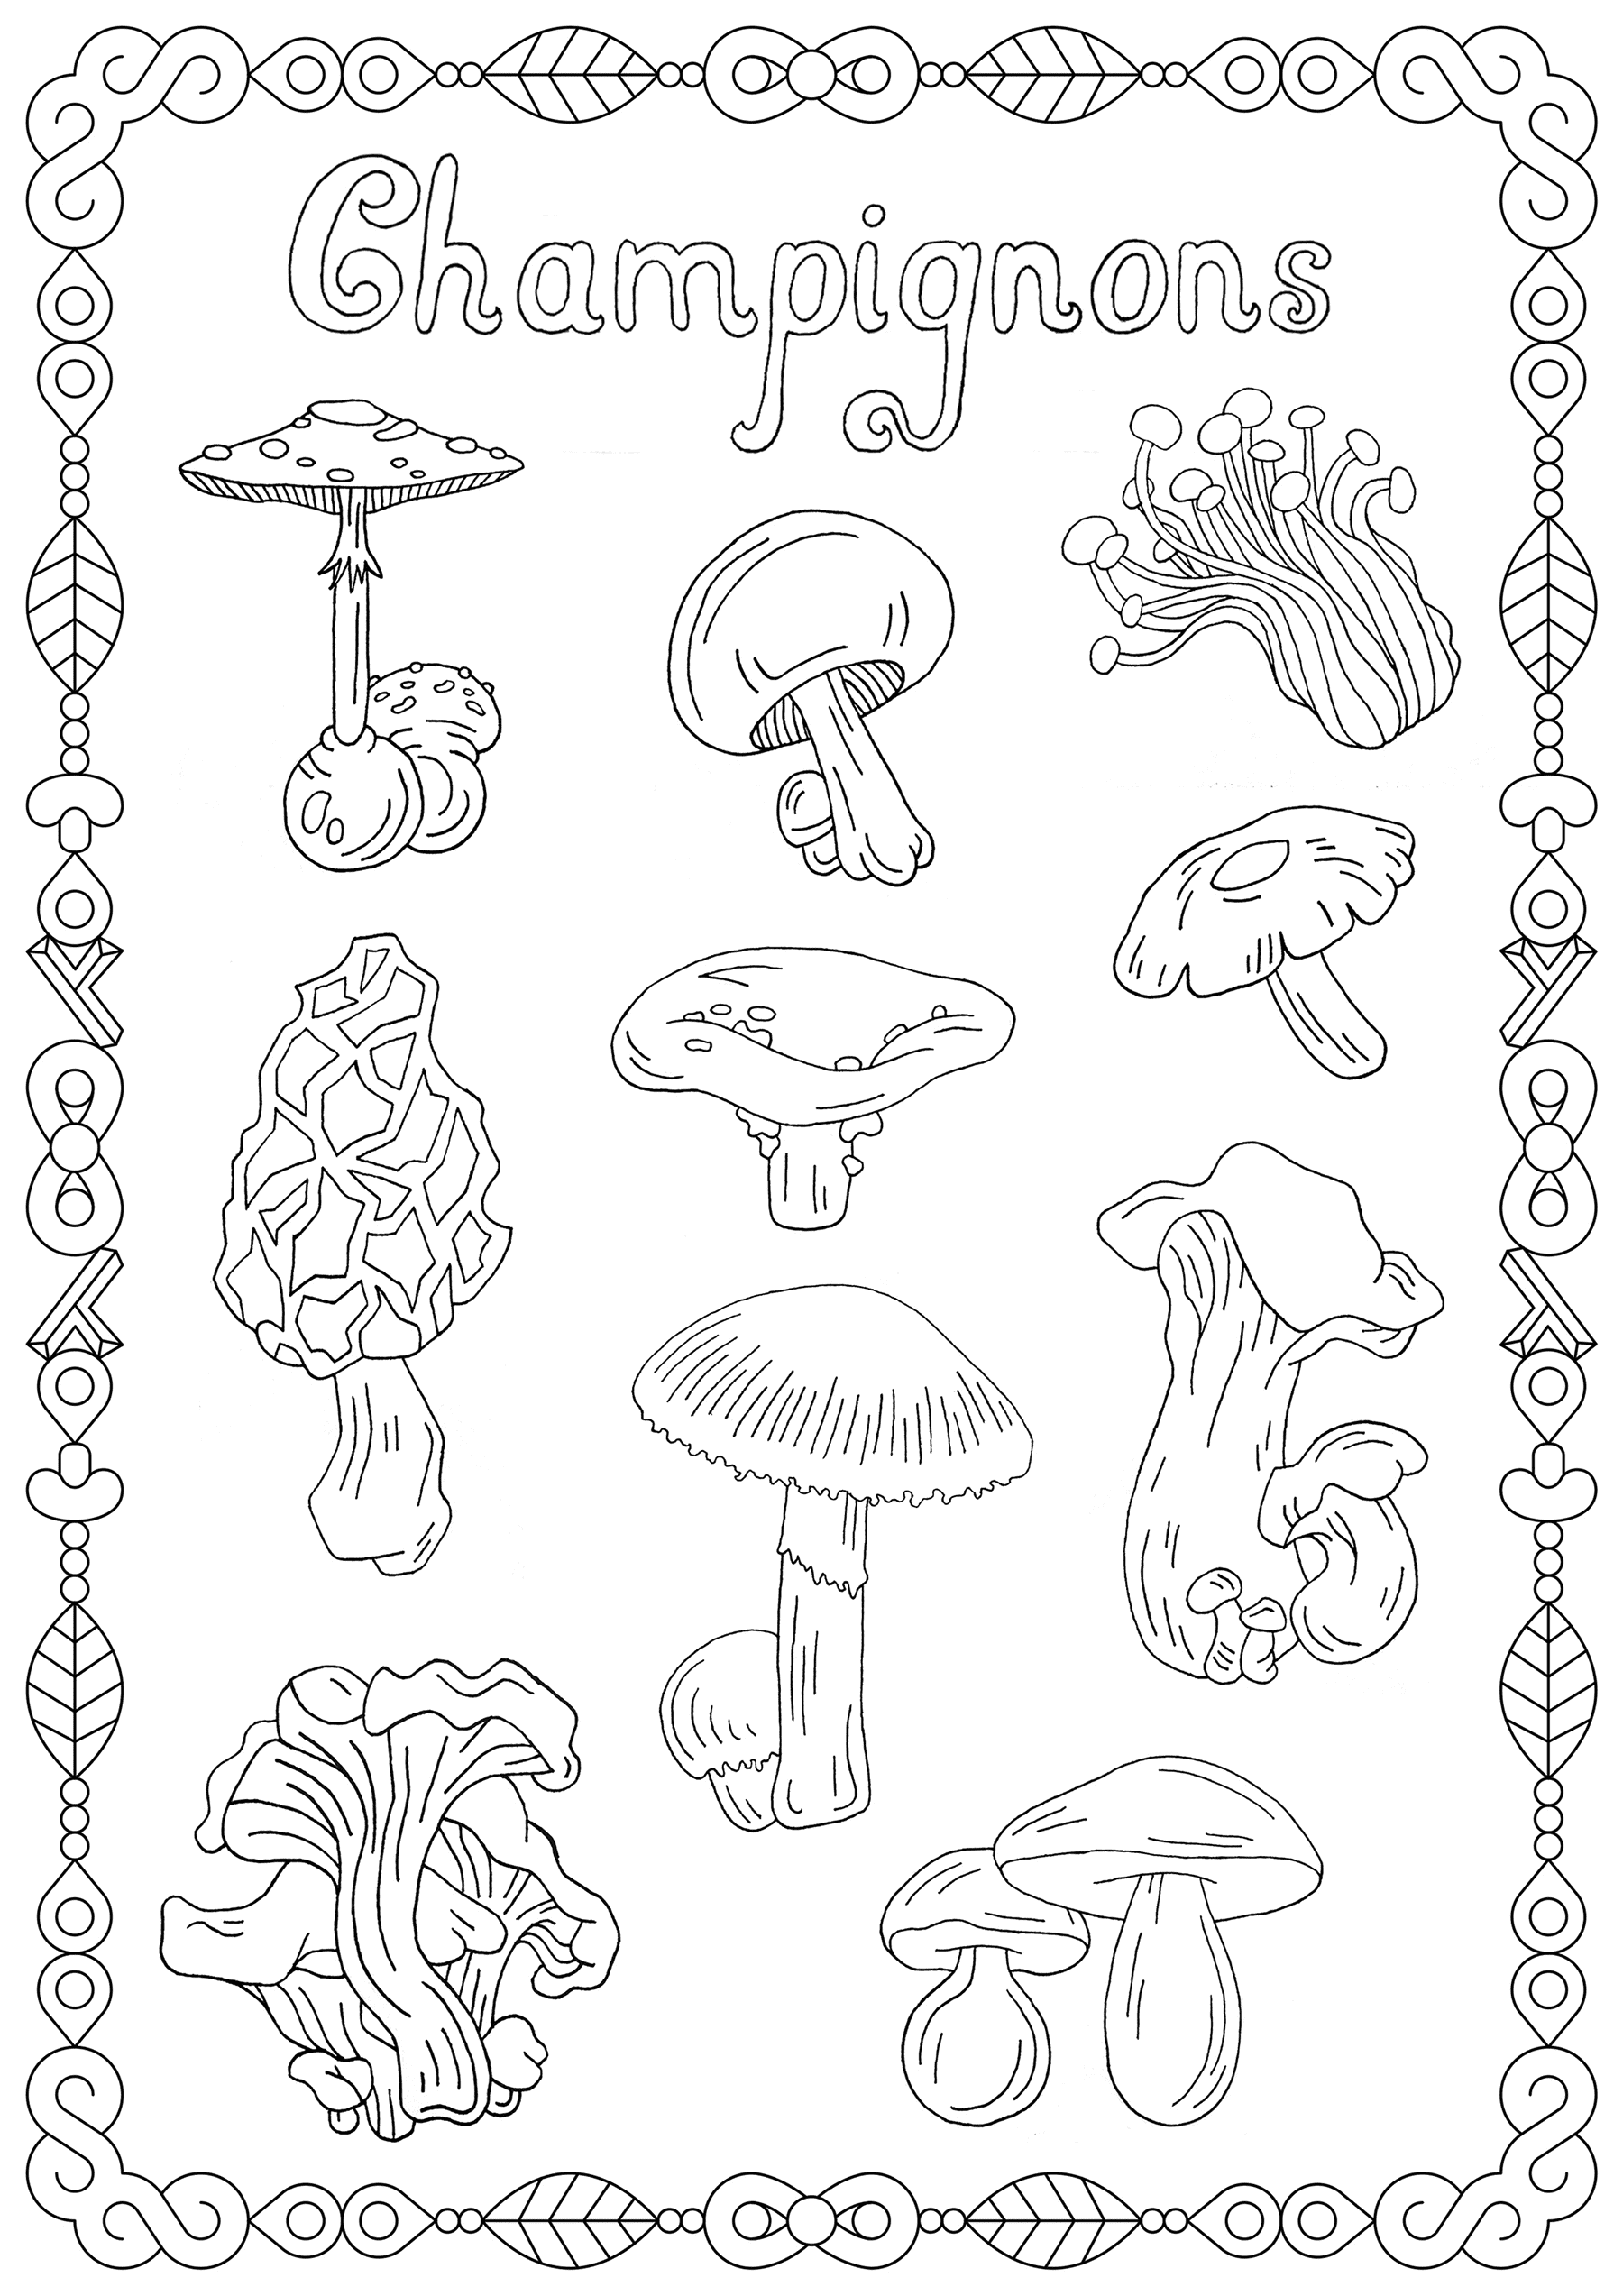 Mushrooms Coloring Page With Few Details For Kids